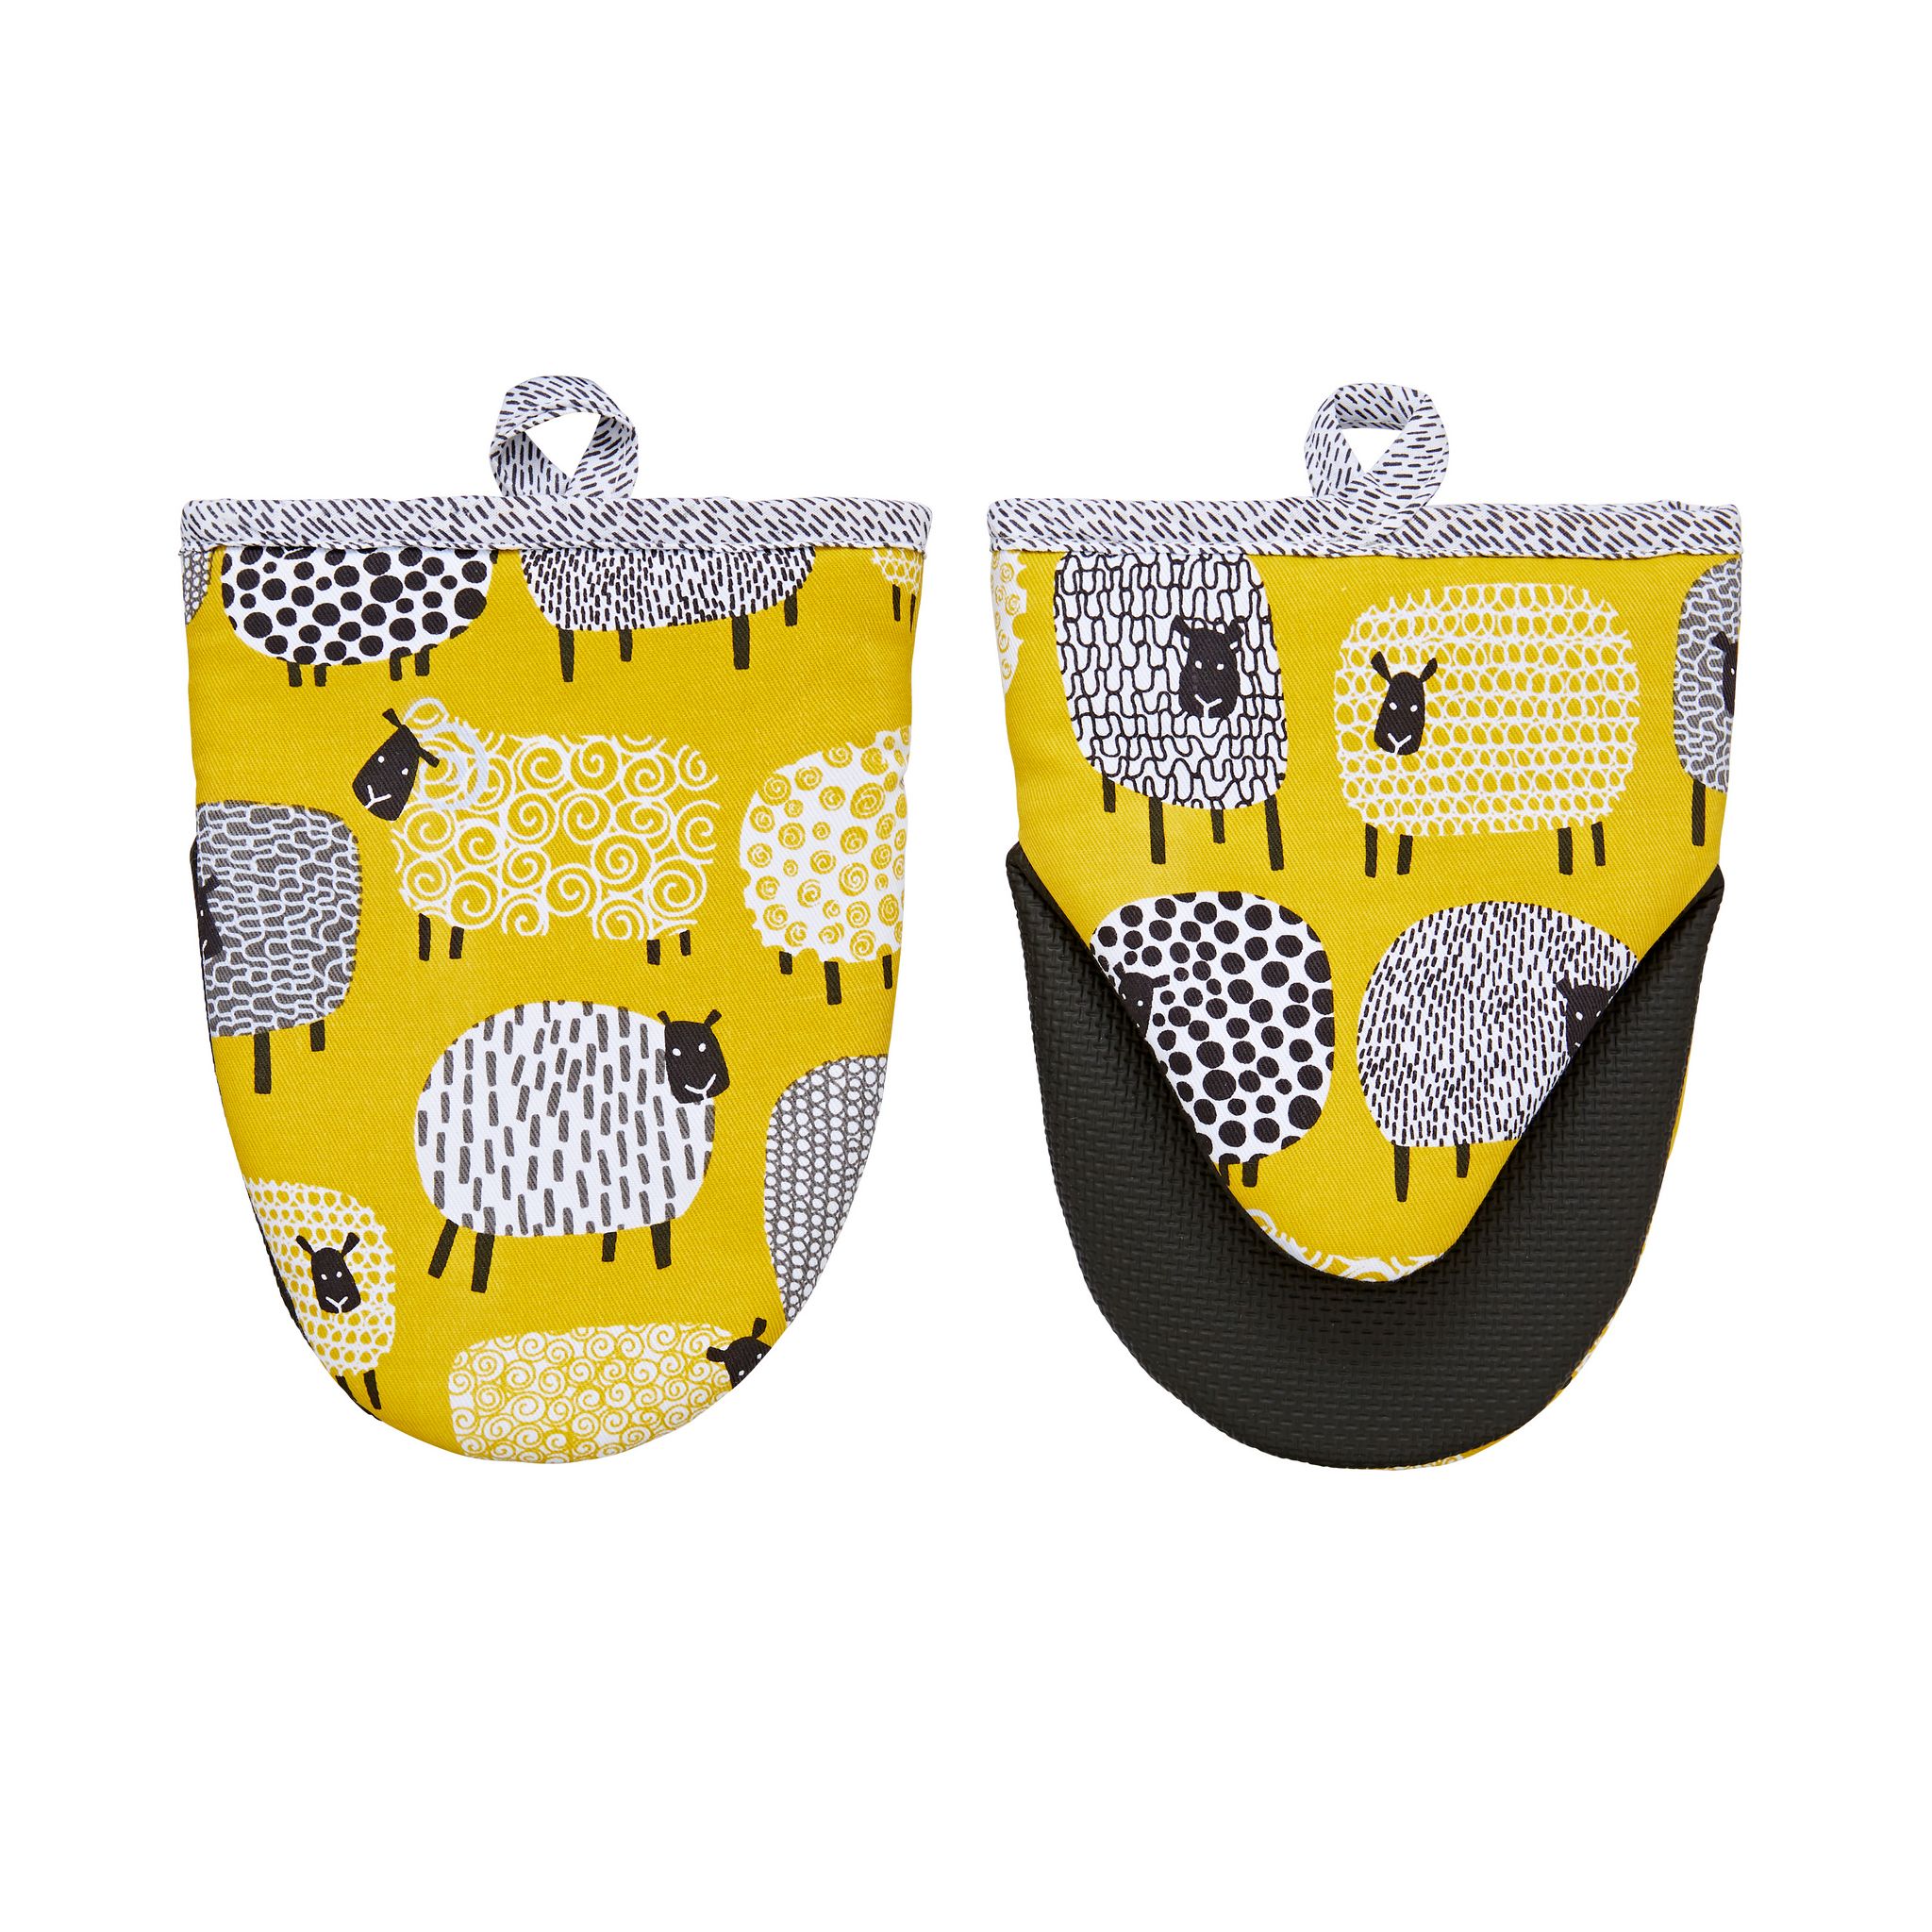 Ulster Weavers Micro Mitts - Dotty Sheep (100% Cotton Outer with Neoprene Sleeve, Yellow) - Micro Mitts - Ulster Weavers